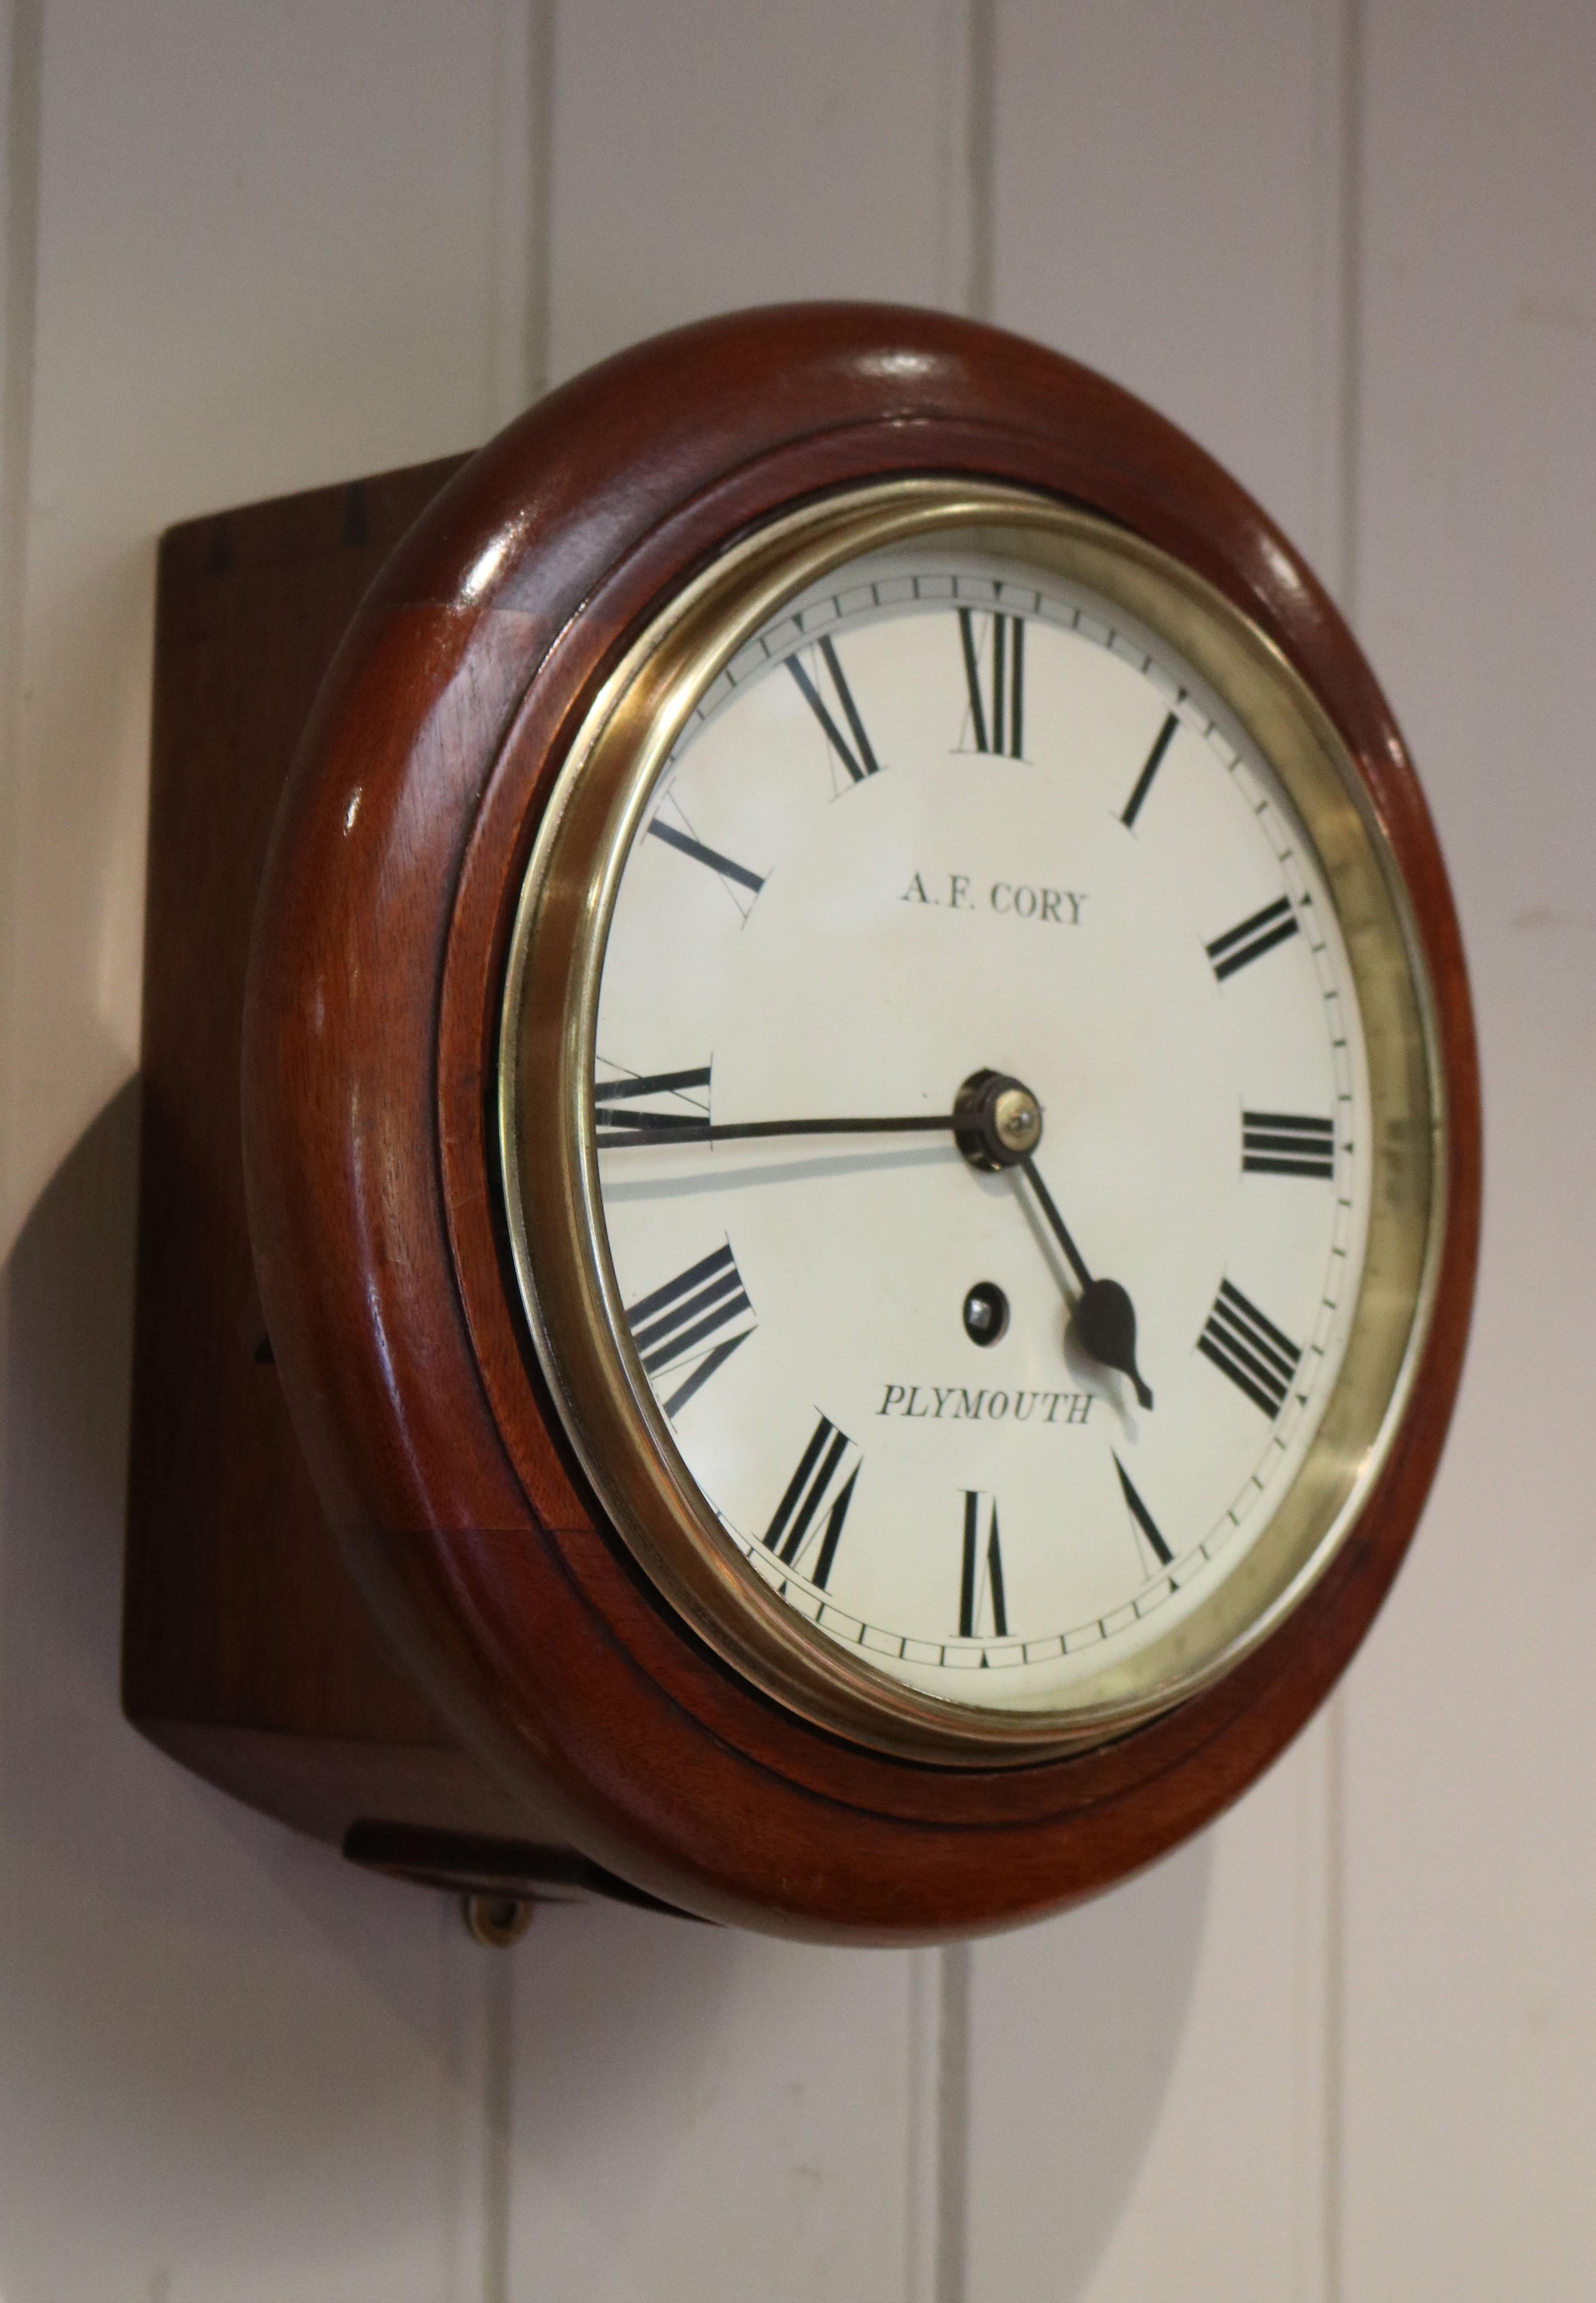 A solid mahogany cased 8 inch diameter dial clock. It has a traditional pegged case, a turned outer rim, a brass bezel and a painted enamel dial signed by the retailer A F Corey of Plymouth. The chain driven 8 day fusee movement has stopwork to